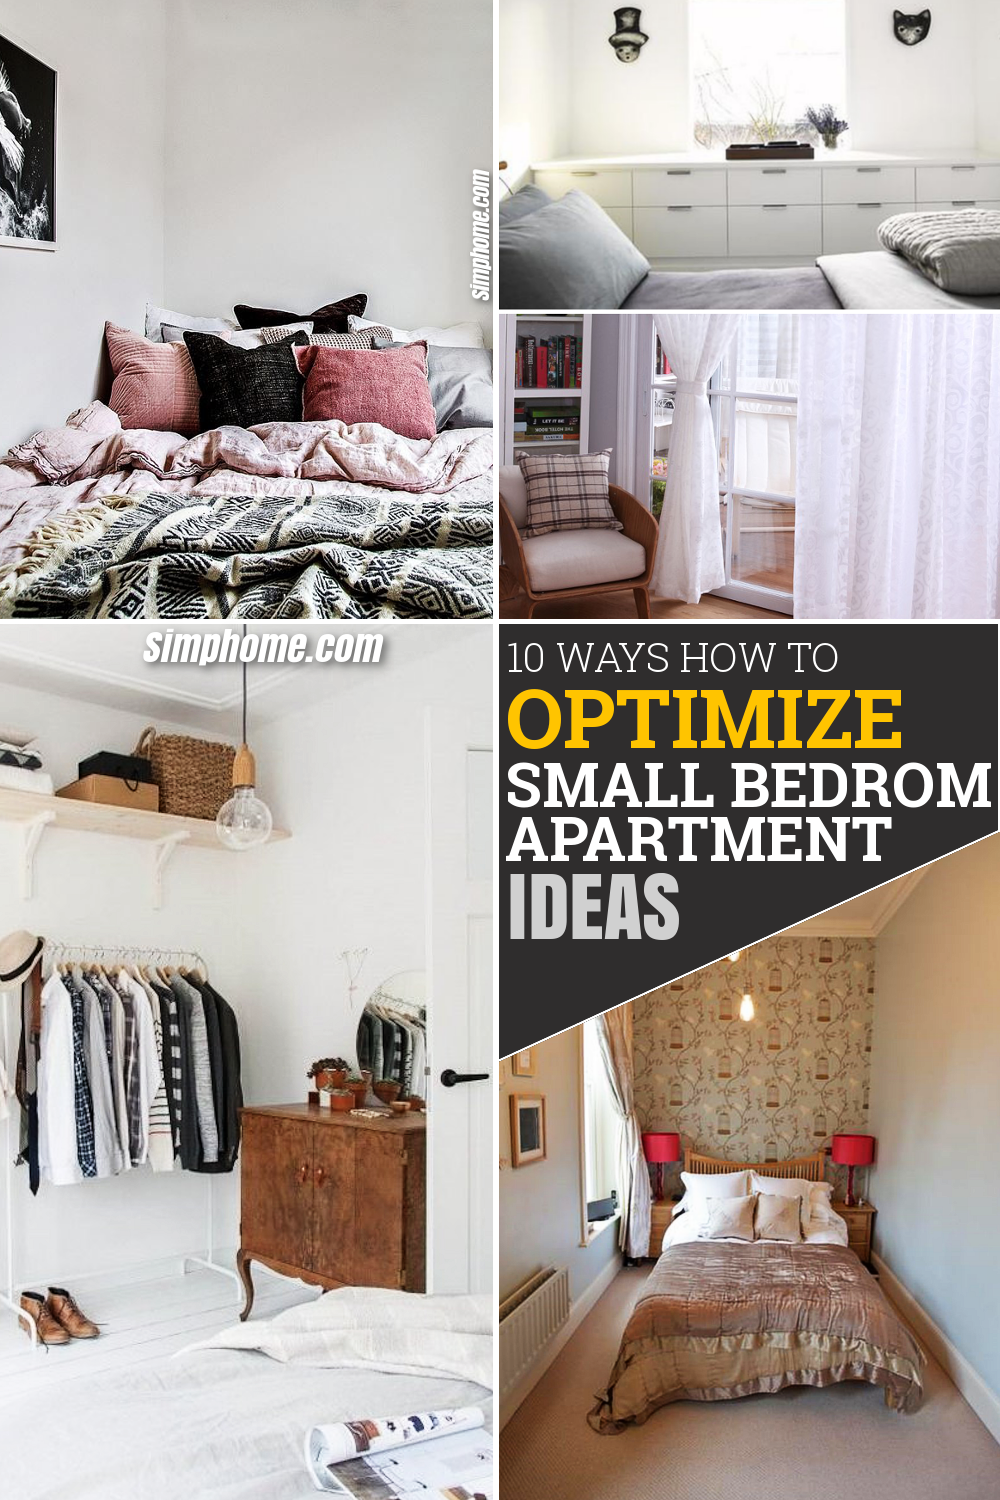 10 WAYS How to Optimize a Small Bedroom Apartment via Simphome Pinterest Featured Image